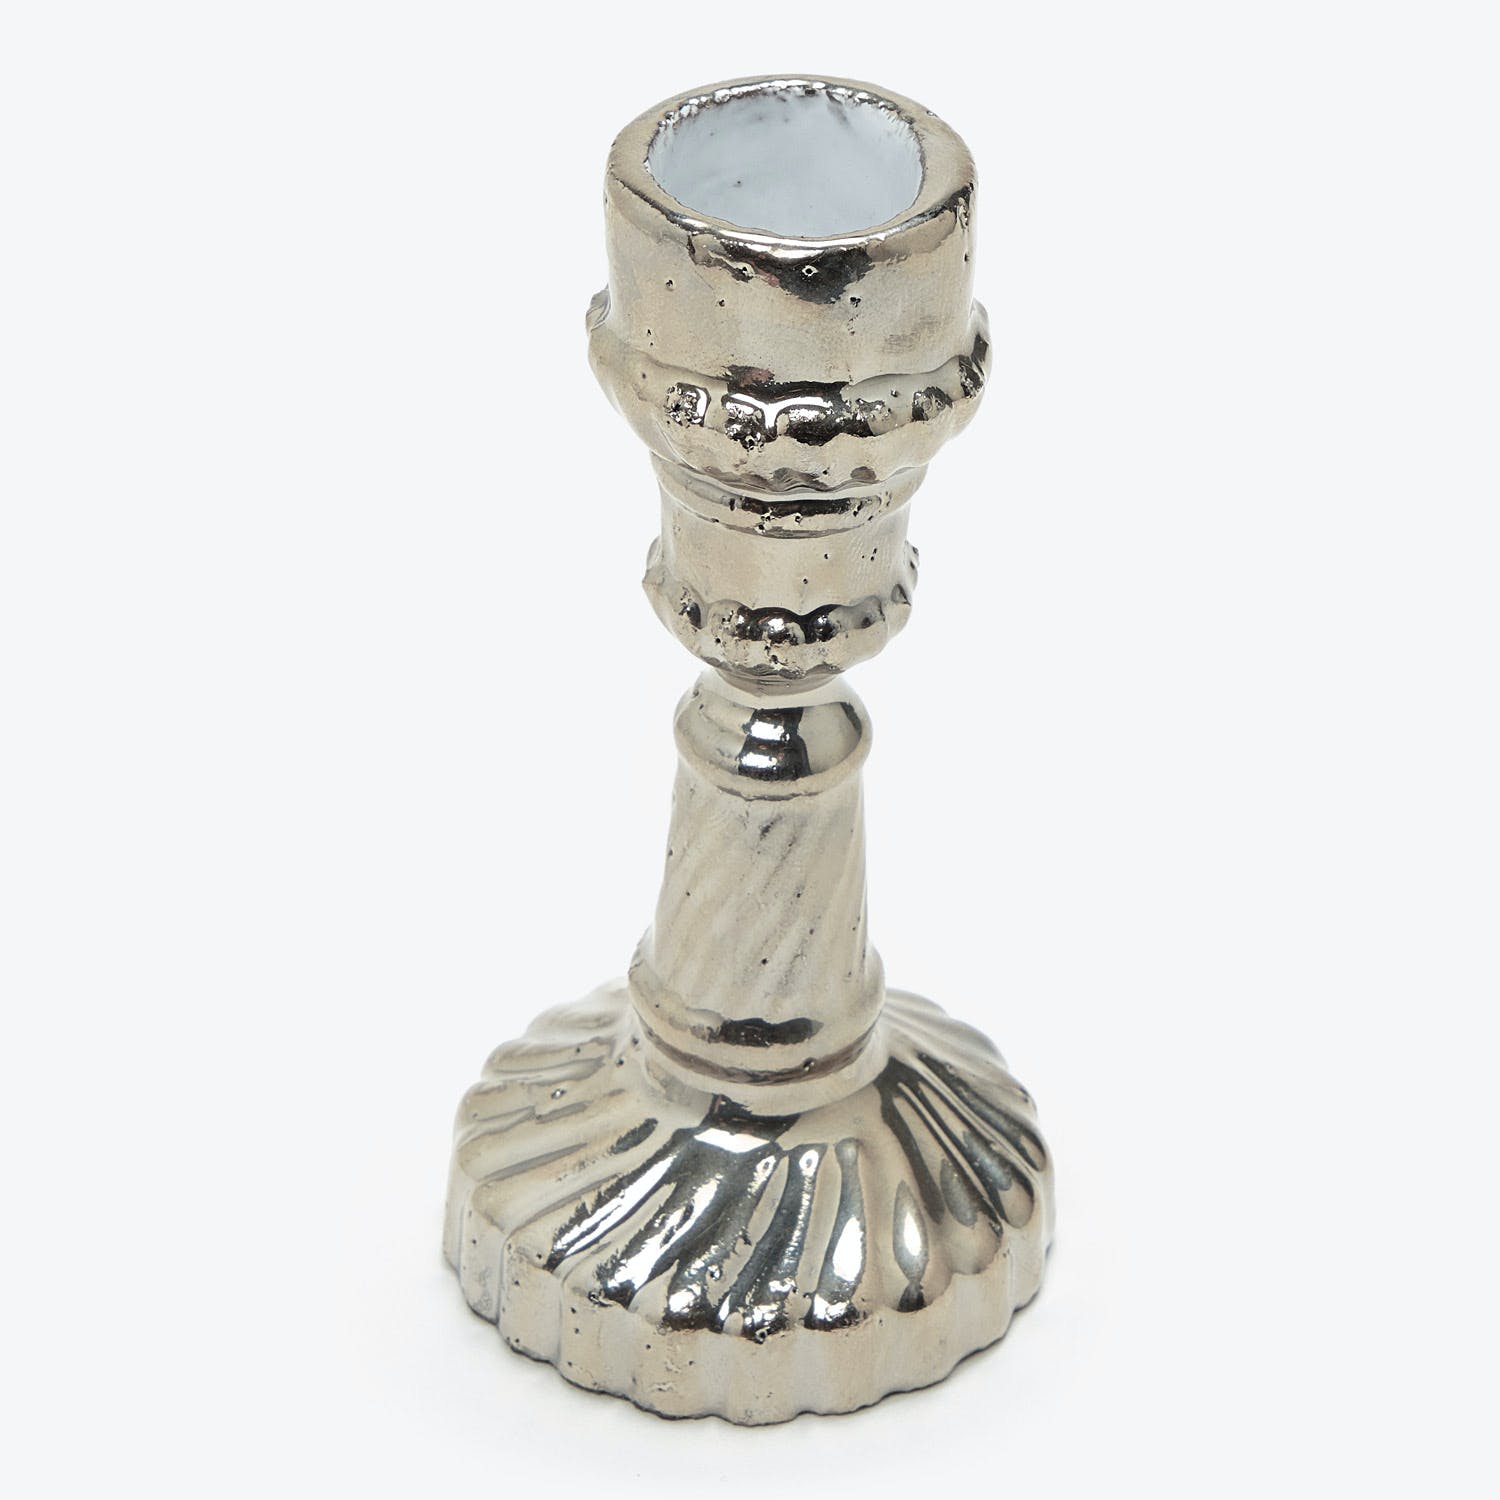 Vintage silver candlestick with intricate detailing and wax-catching holder.